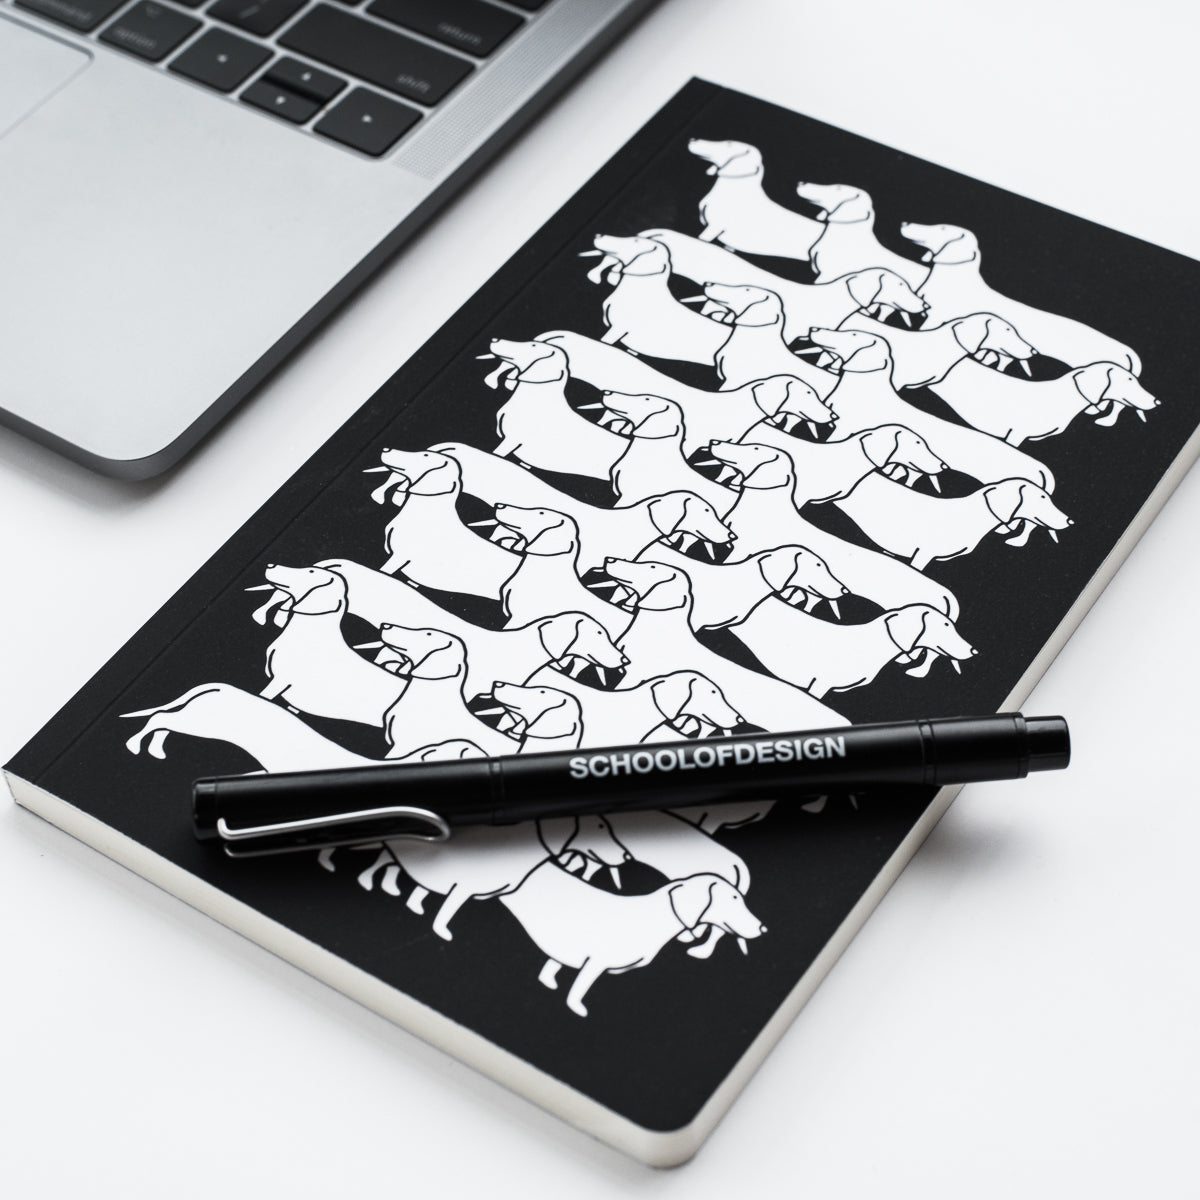 black notebook with horizontal dachshund illustration pattern in white, and black school of design pen